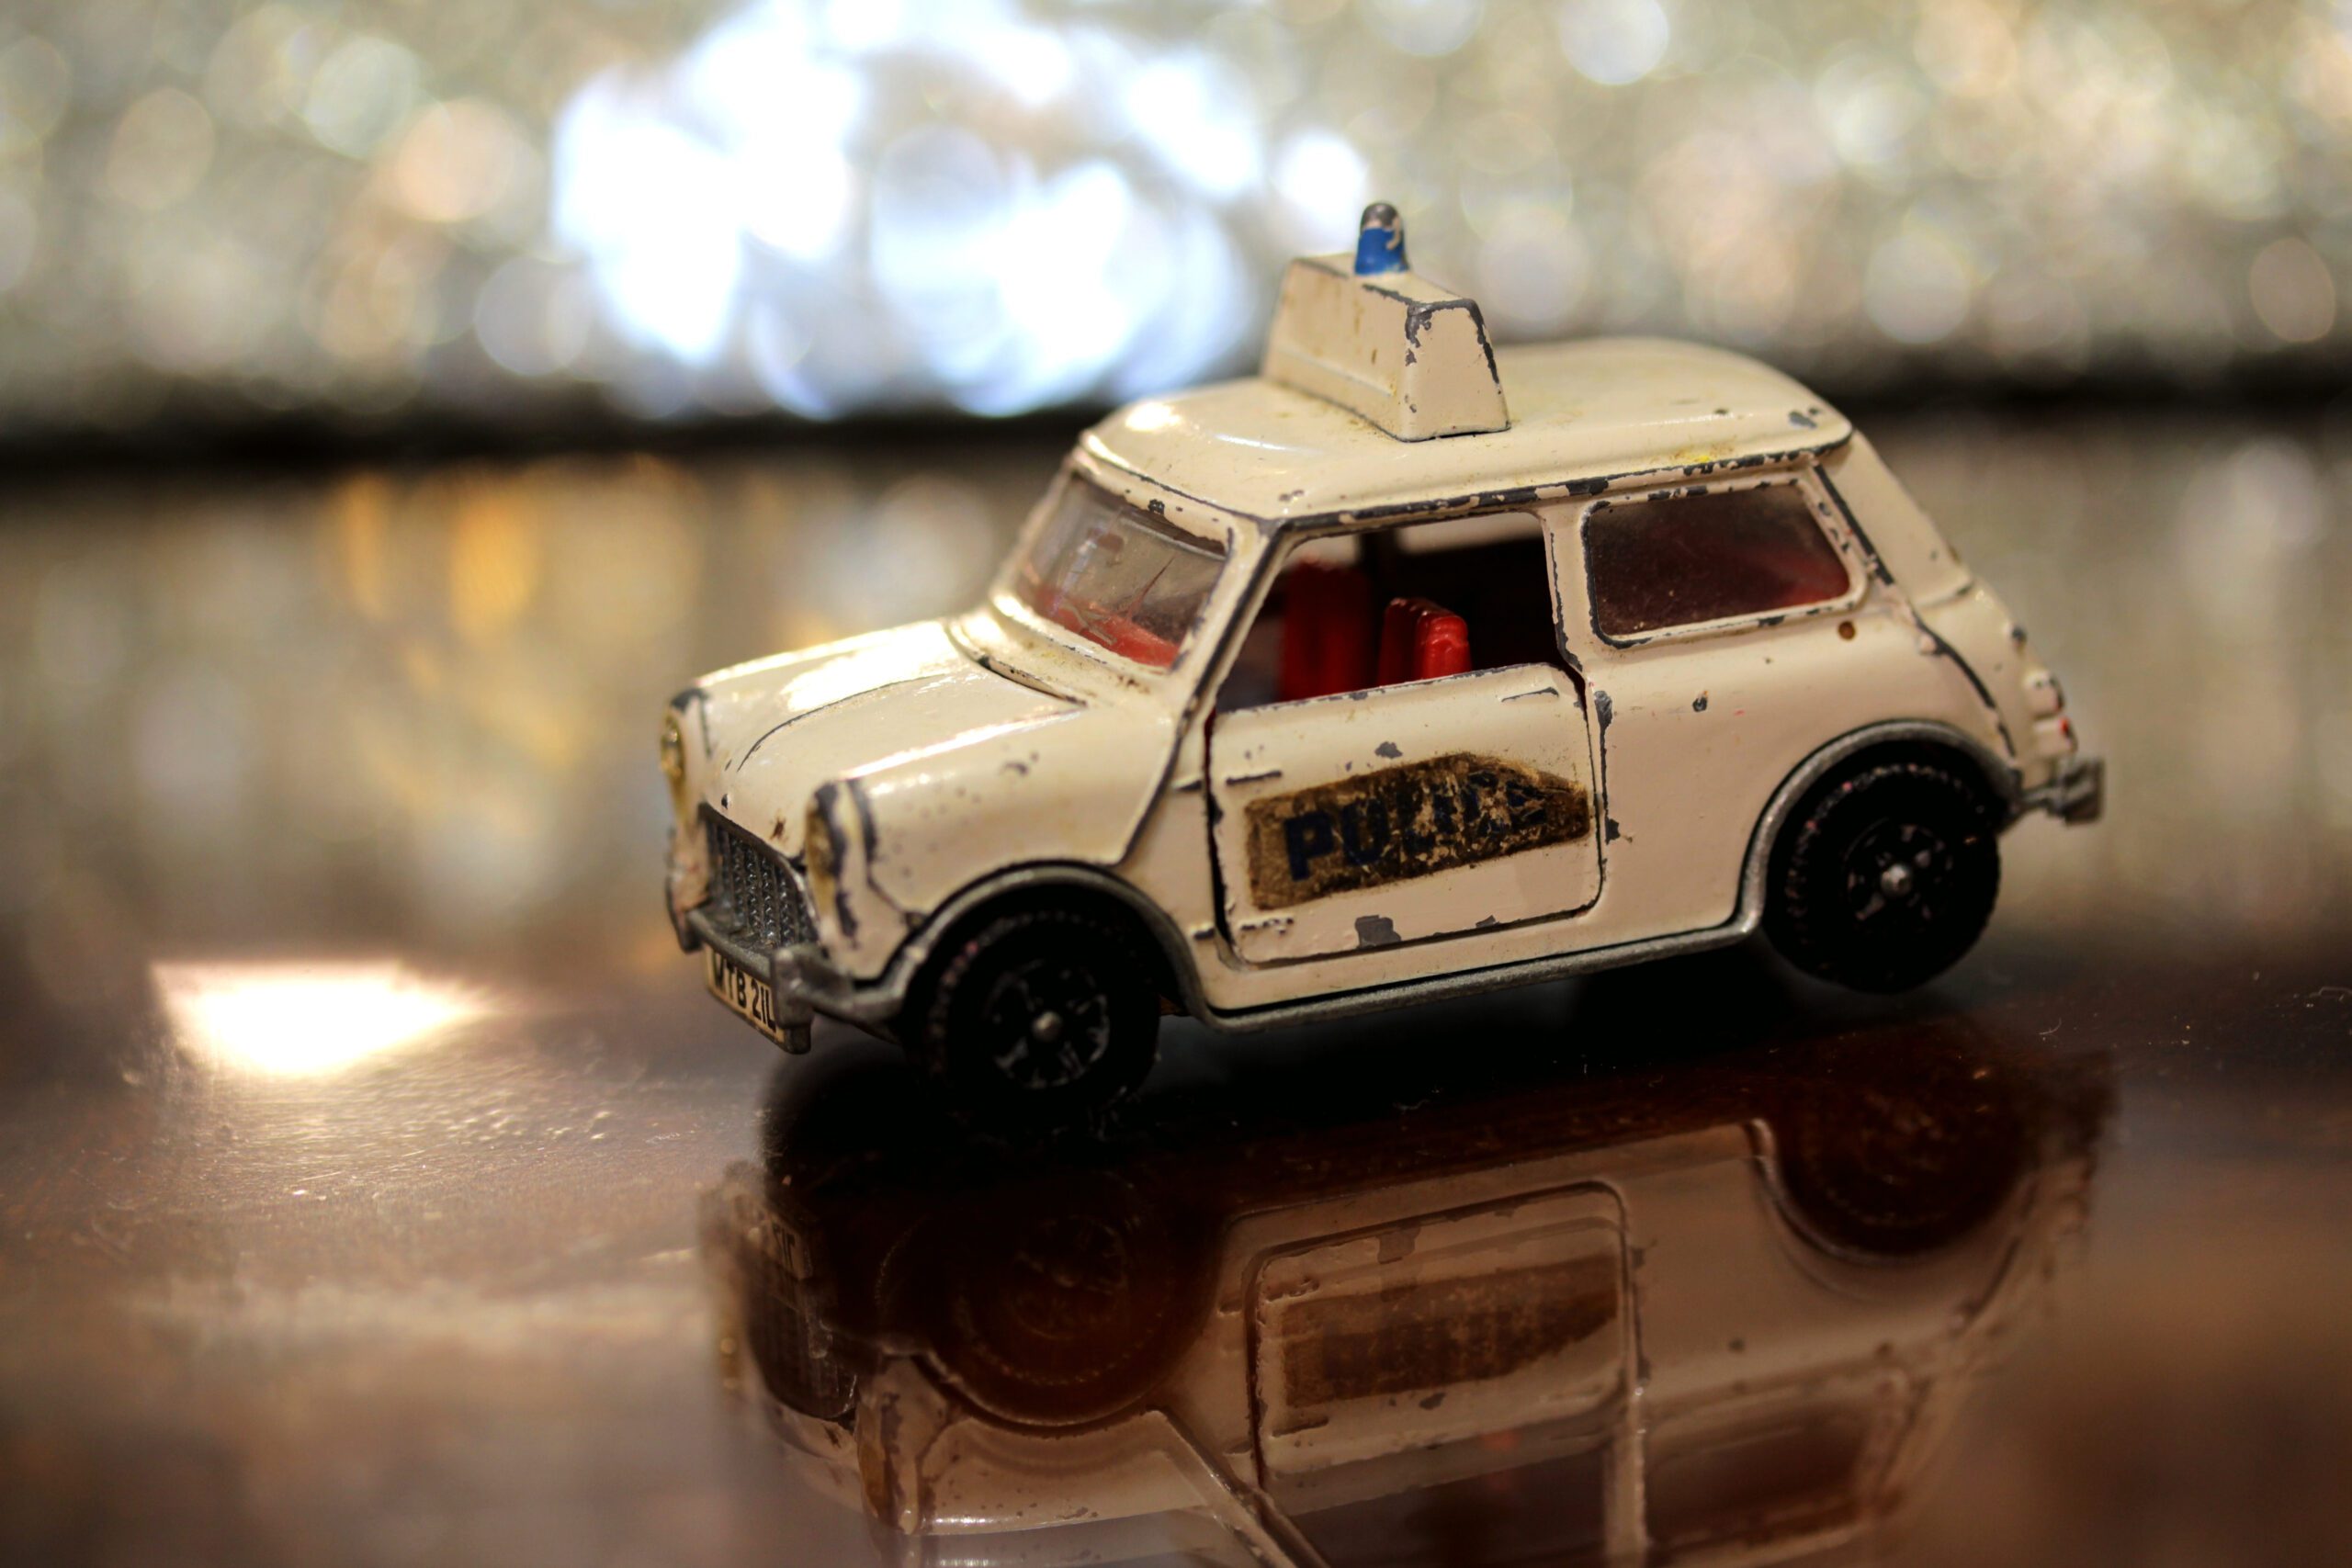 Miniature toy car that is part of car vintage toy collecting